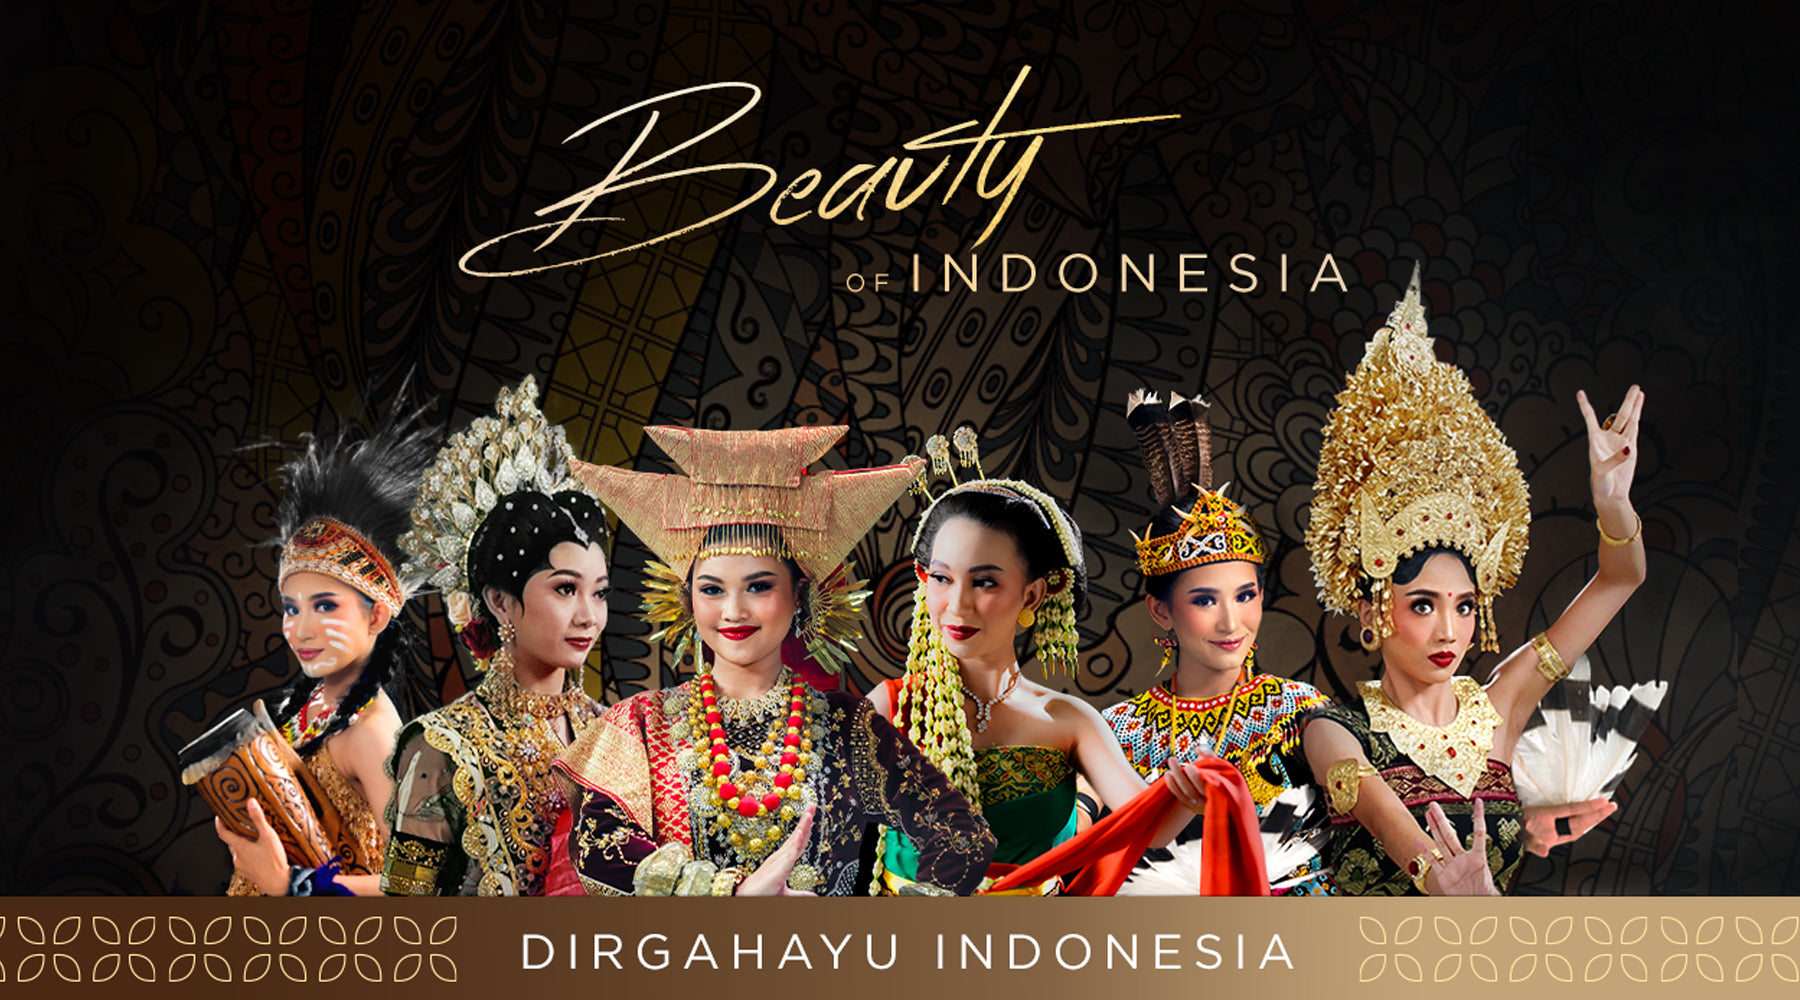 CELEBRATE INDONESIA'S INDEPENDENCE DAY WITH DIVERSITY IN CREATIVITY